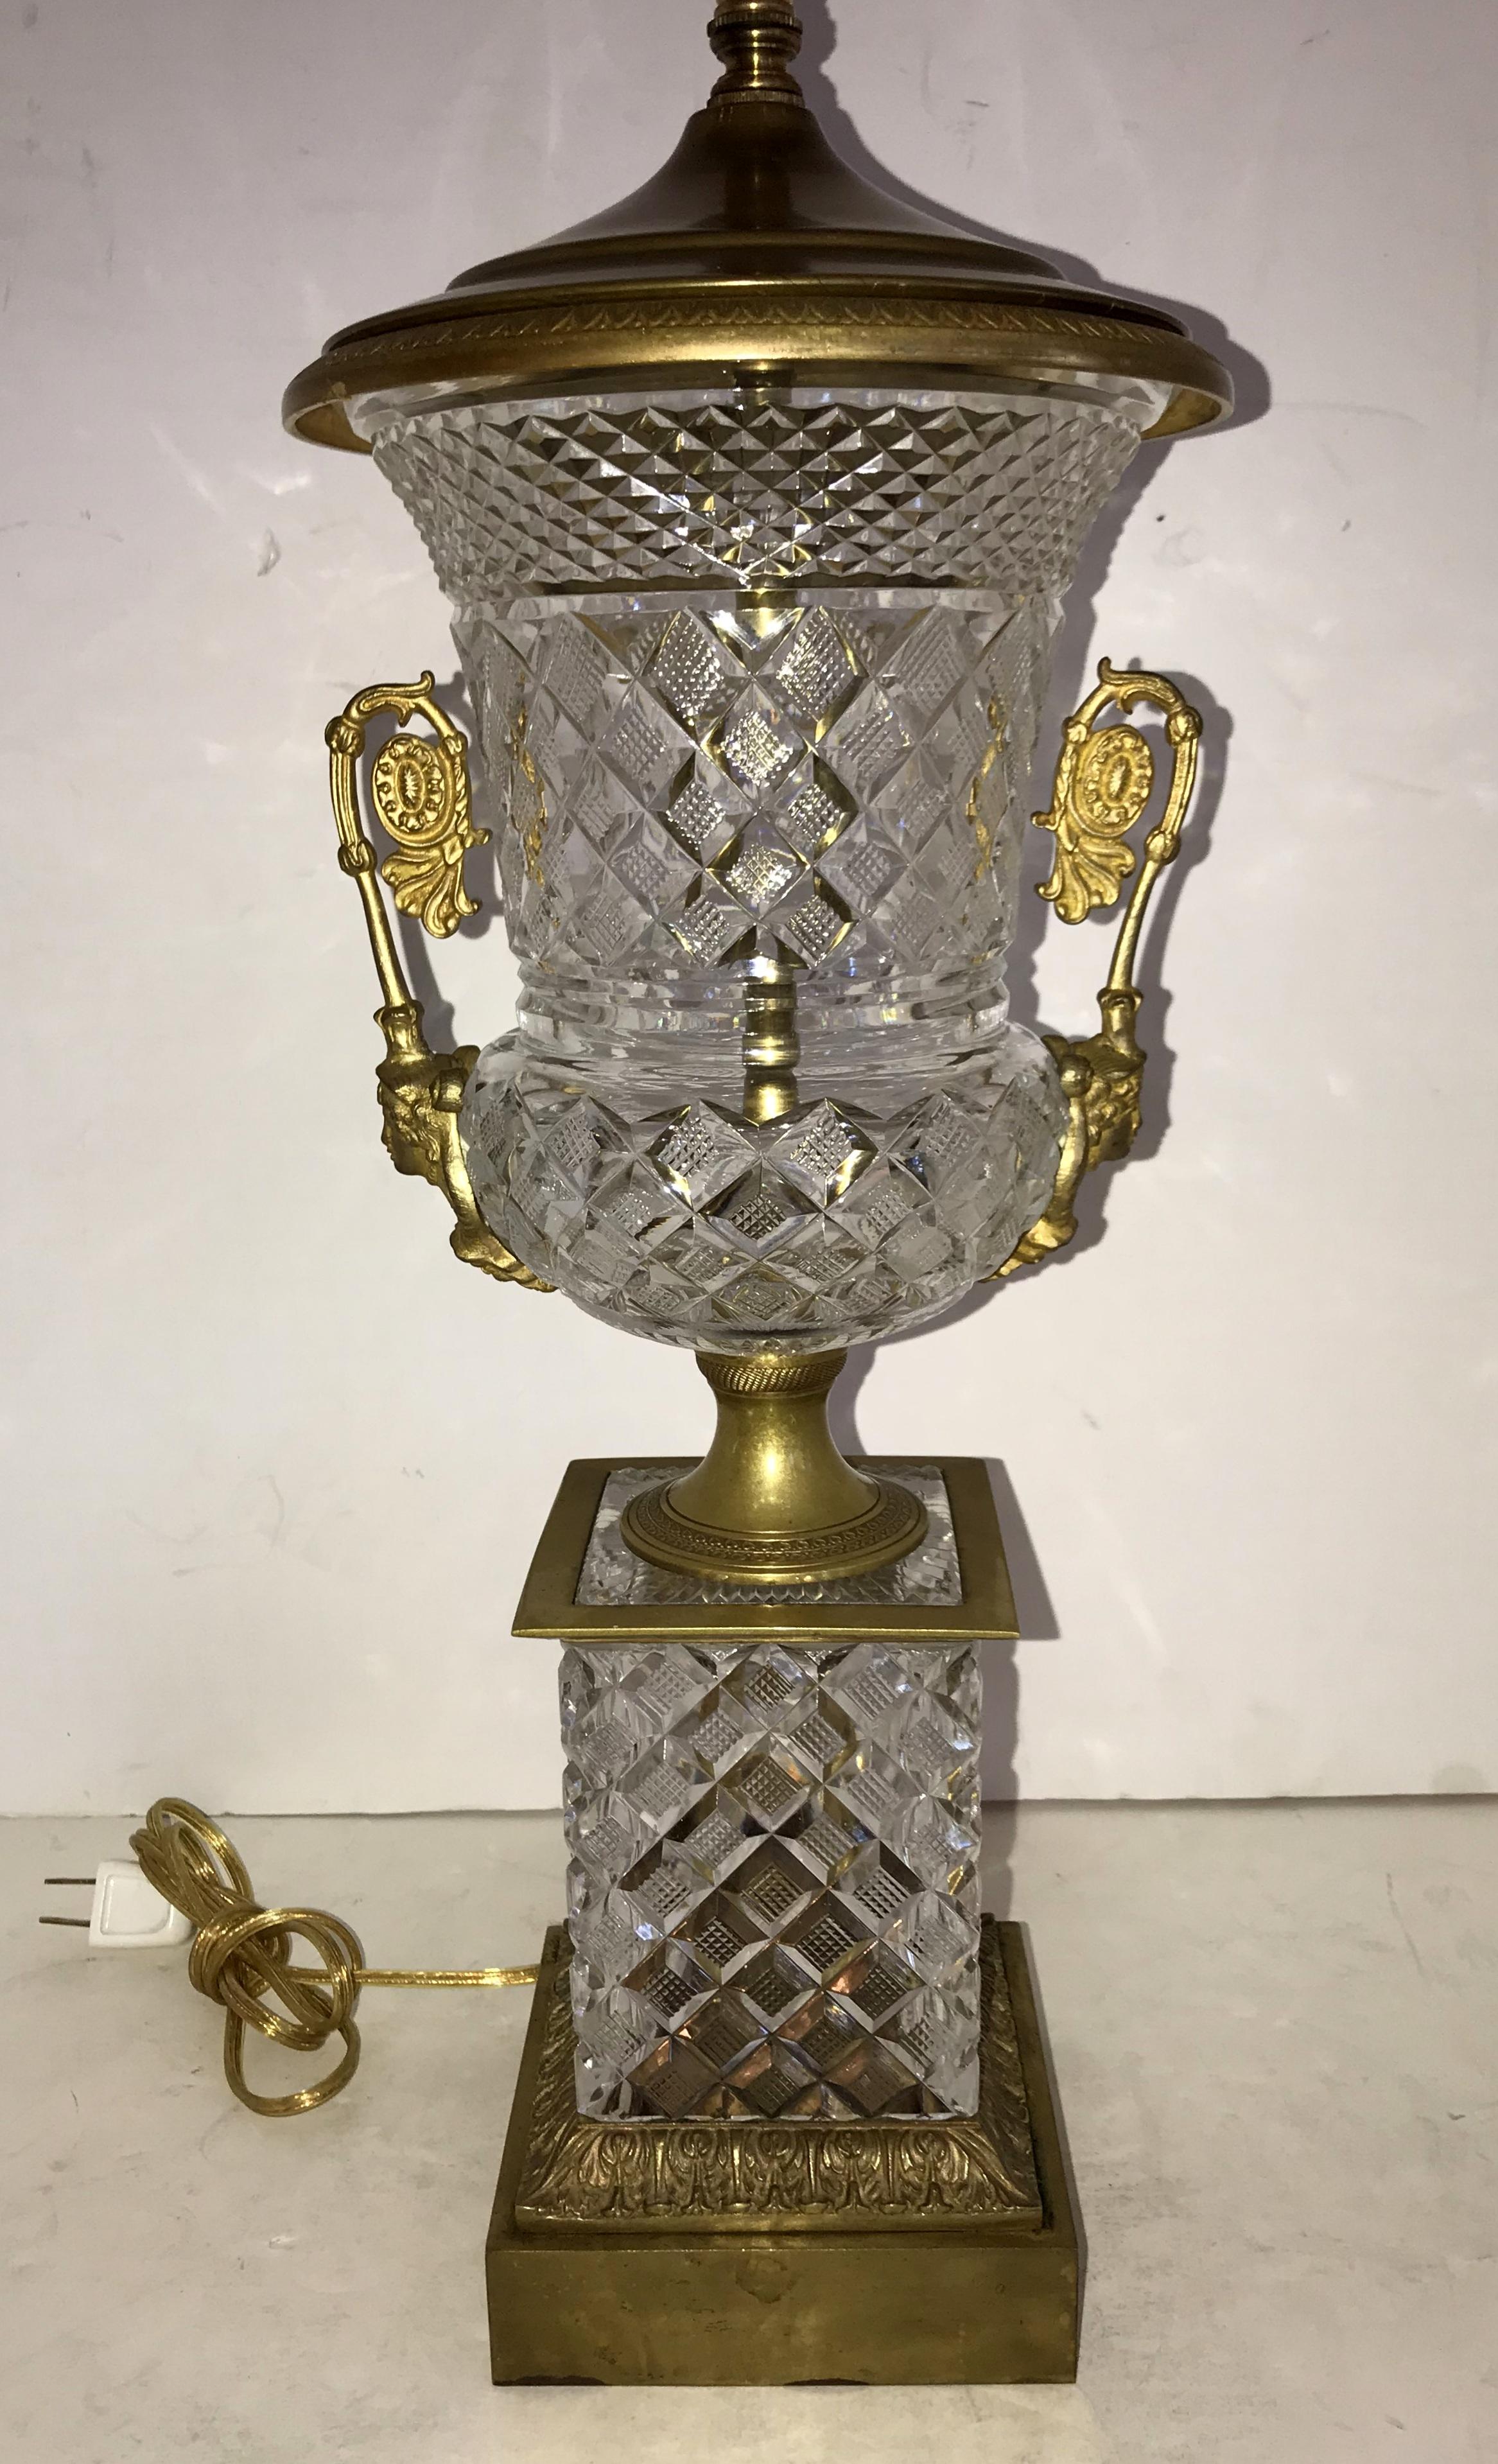 A wonderful pair of French Empire / neoclassical cut crystal and gilt doré bronze ormolu-mounted urn form lamps, completely rewired with two Edison sockets each.
Height is adjustable.